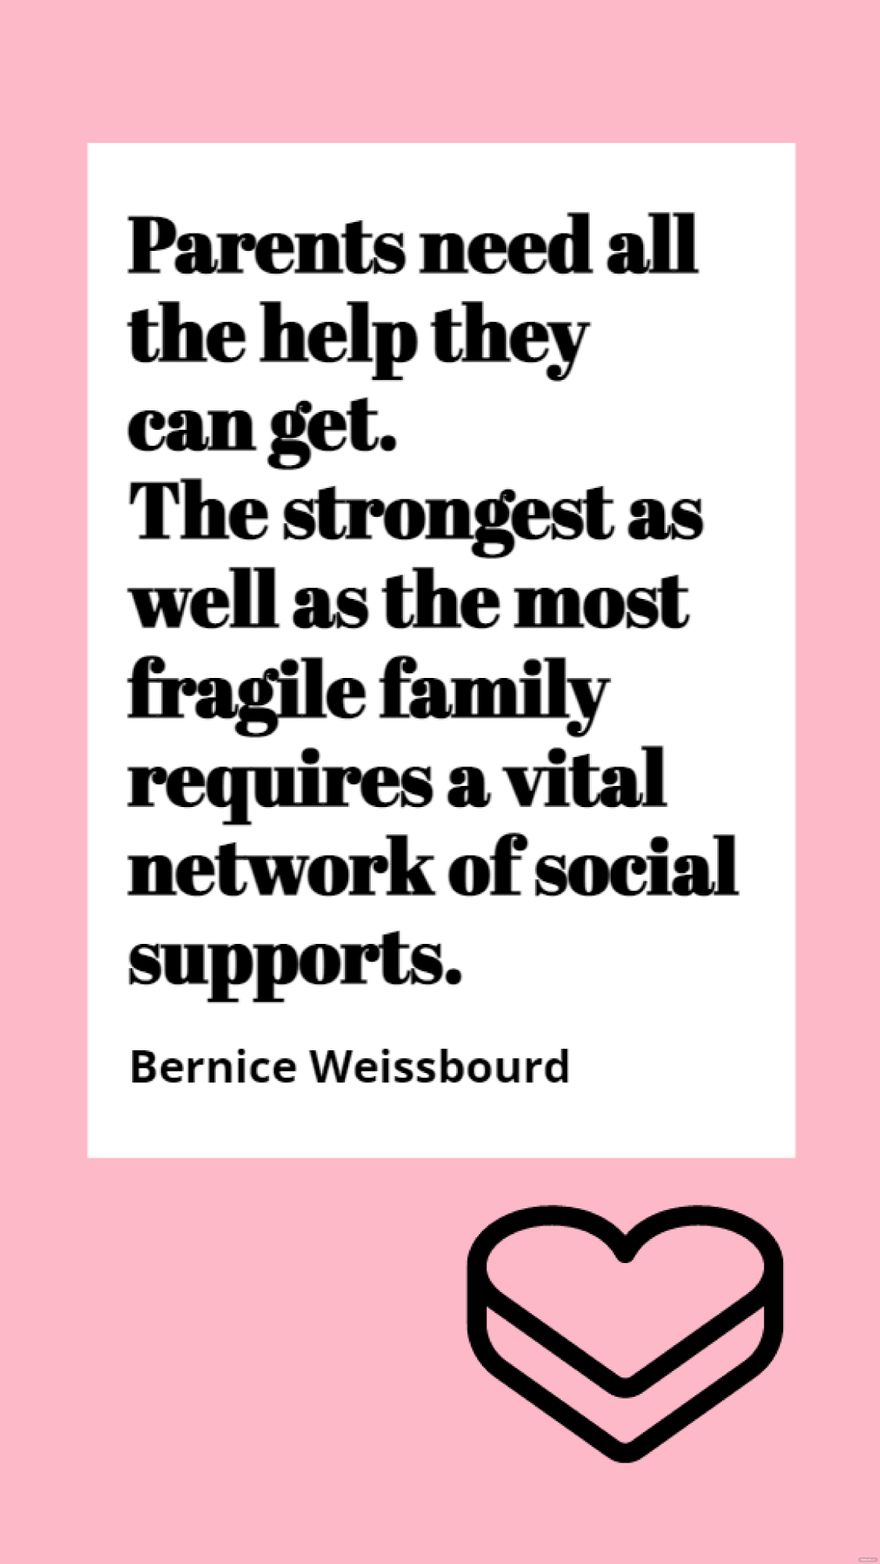 Free Bernice Weissbourd - Parents need all the help they can get. The strongest as well as the most fragile family requires a vital network of social supports.